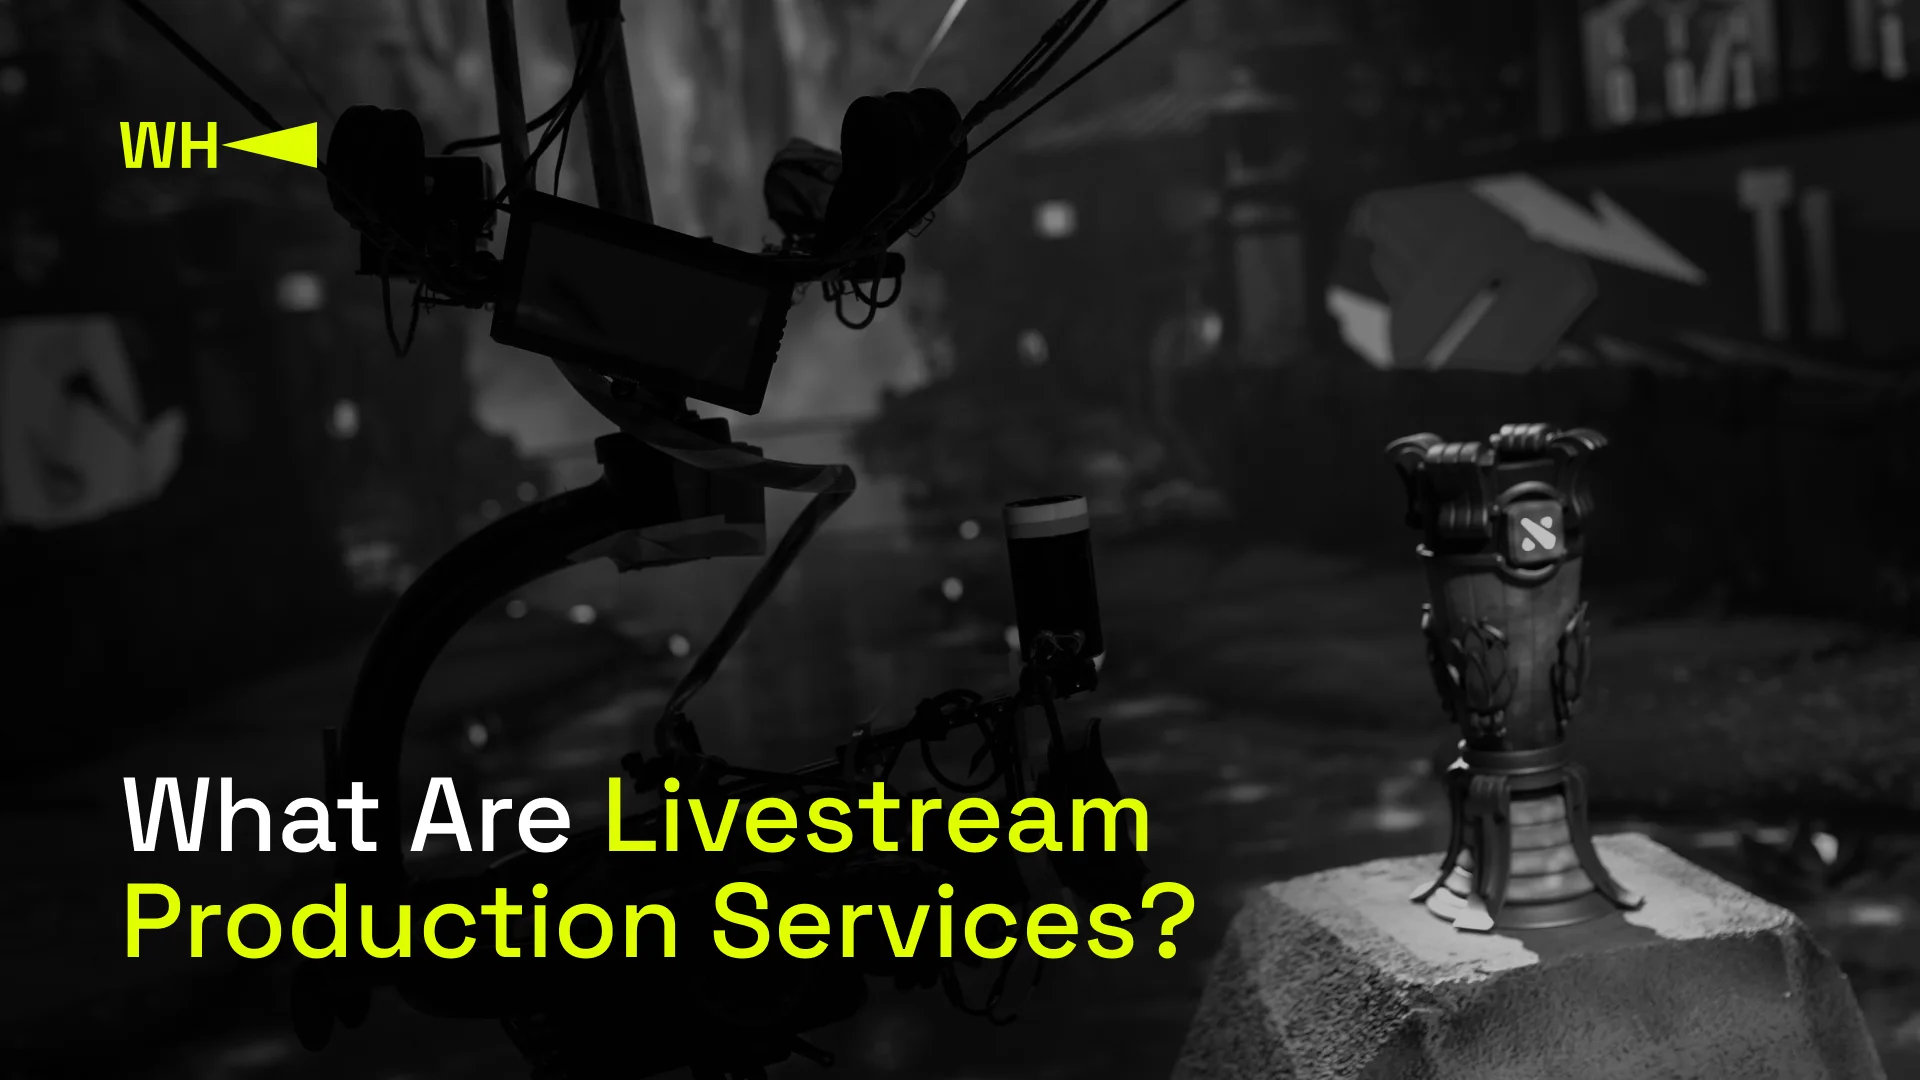 What Are Livestream Production Services?